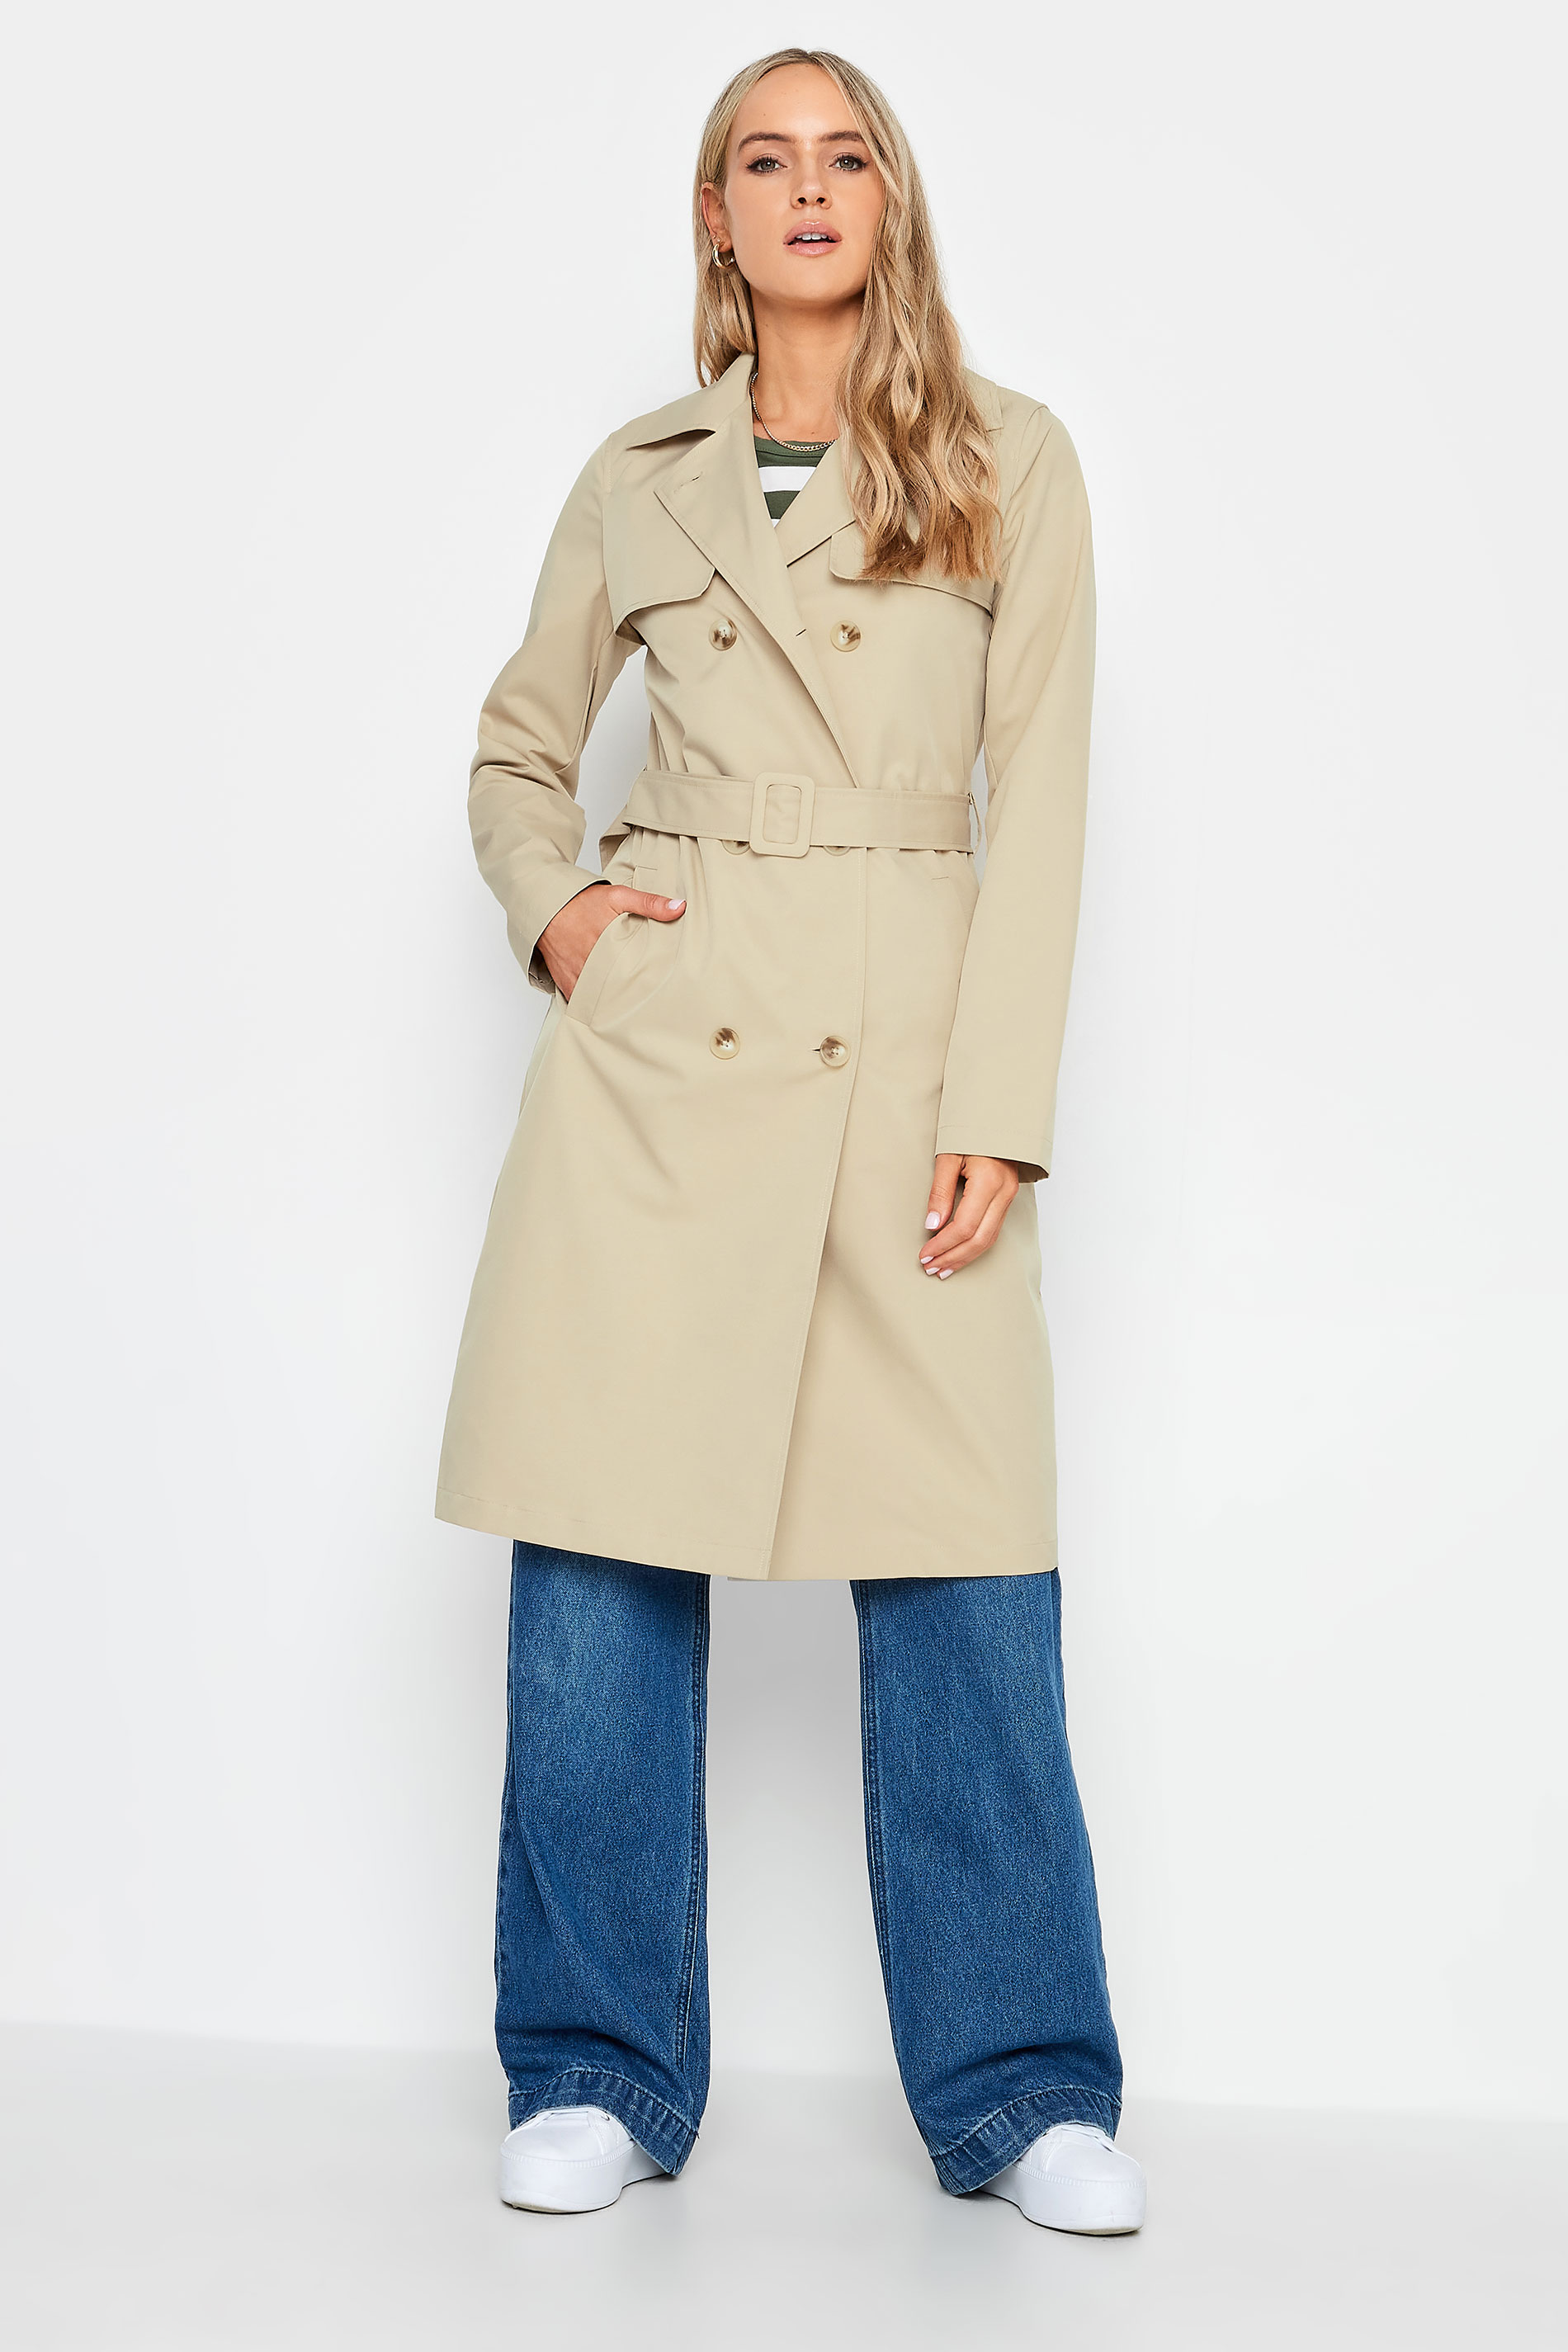 LTS Tall Beige Brown Trench Coat | Long Tall Sally  2